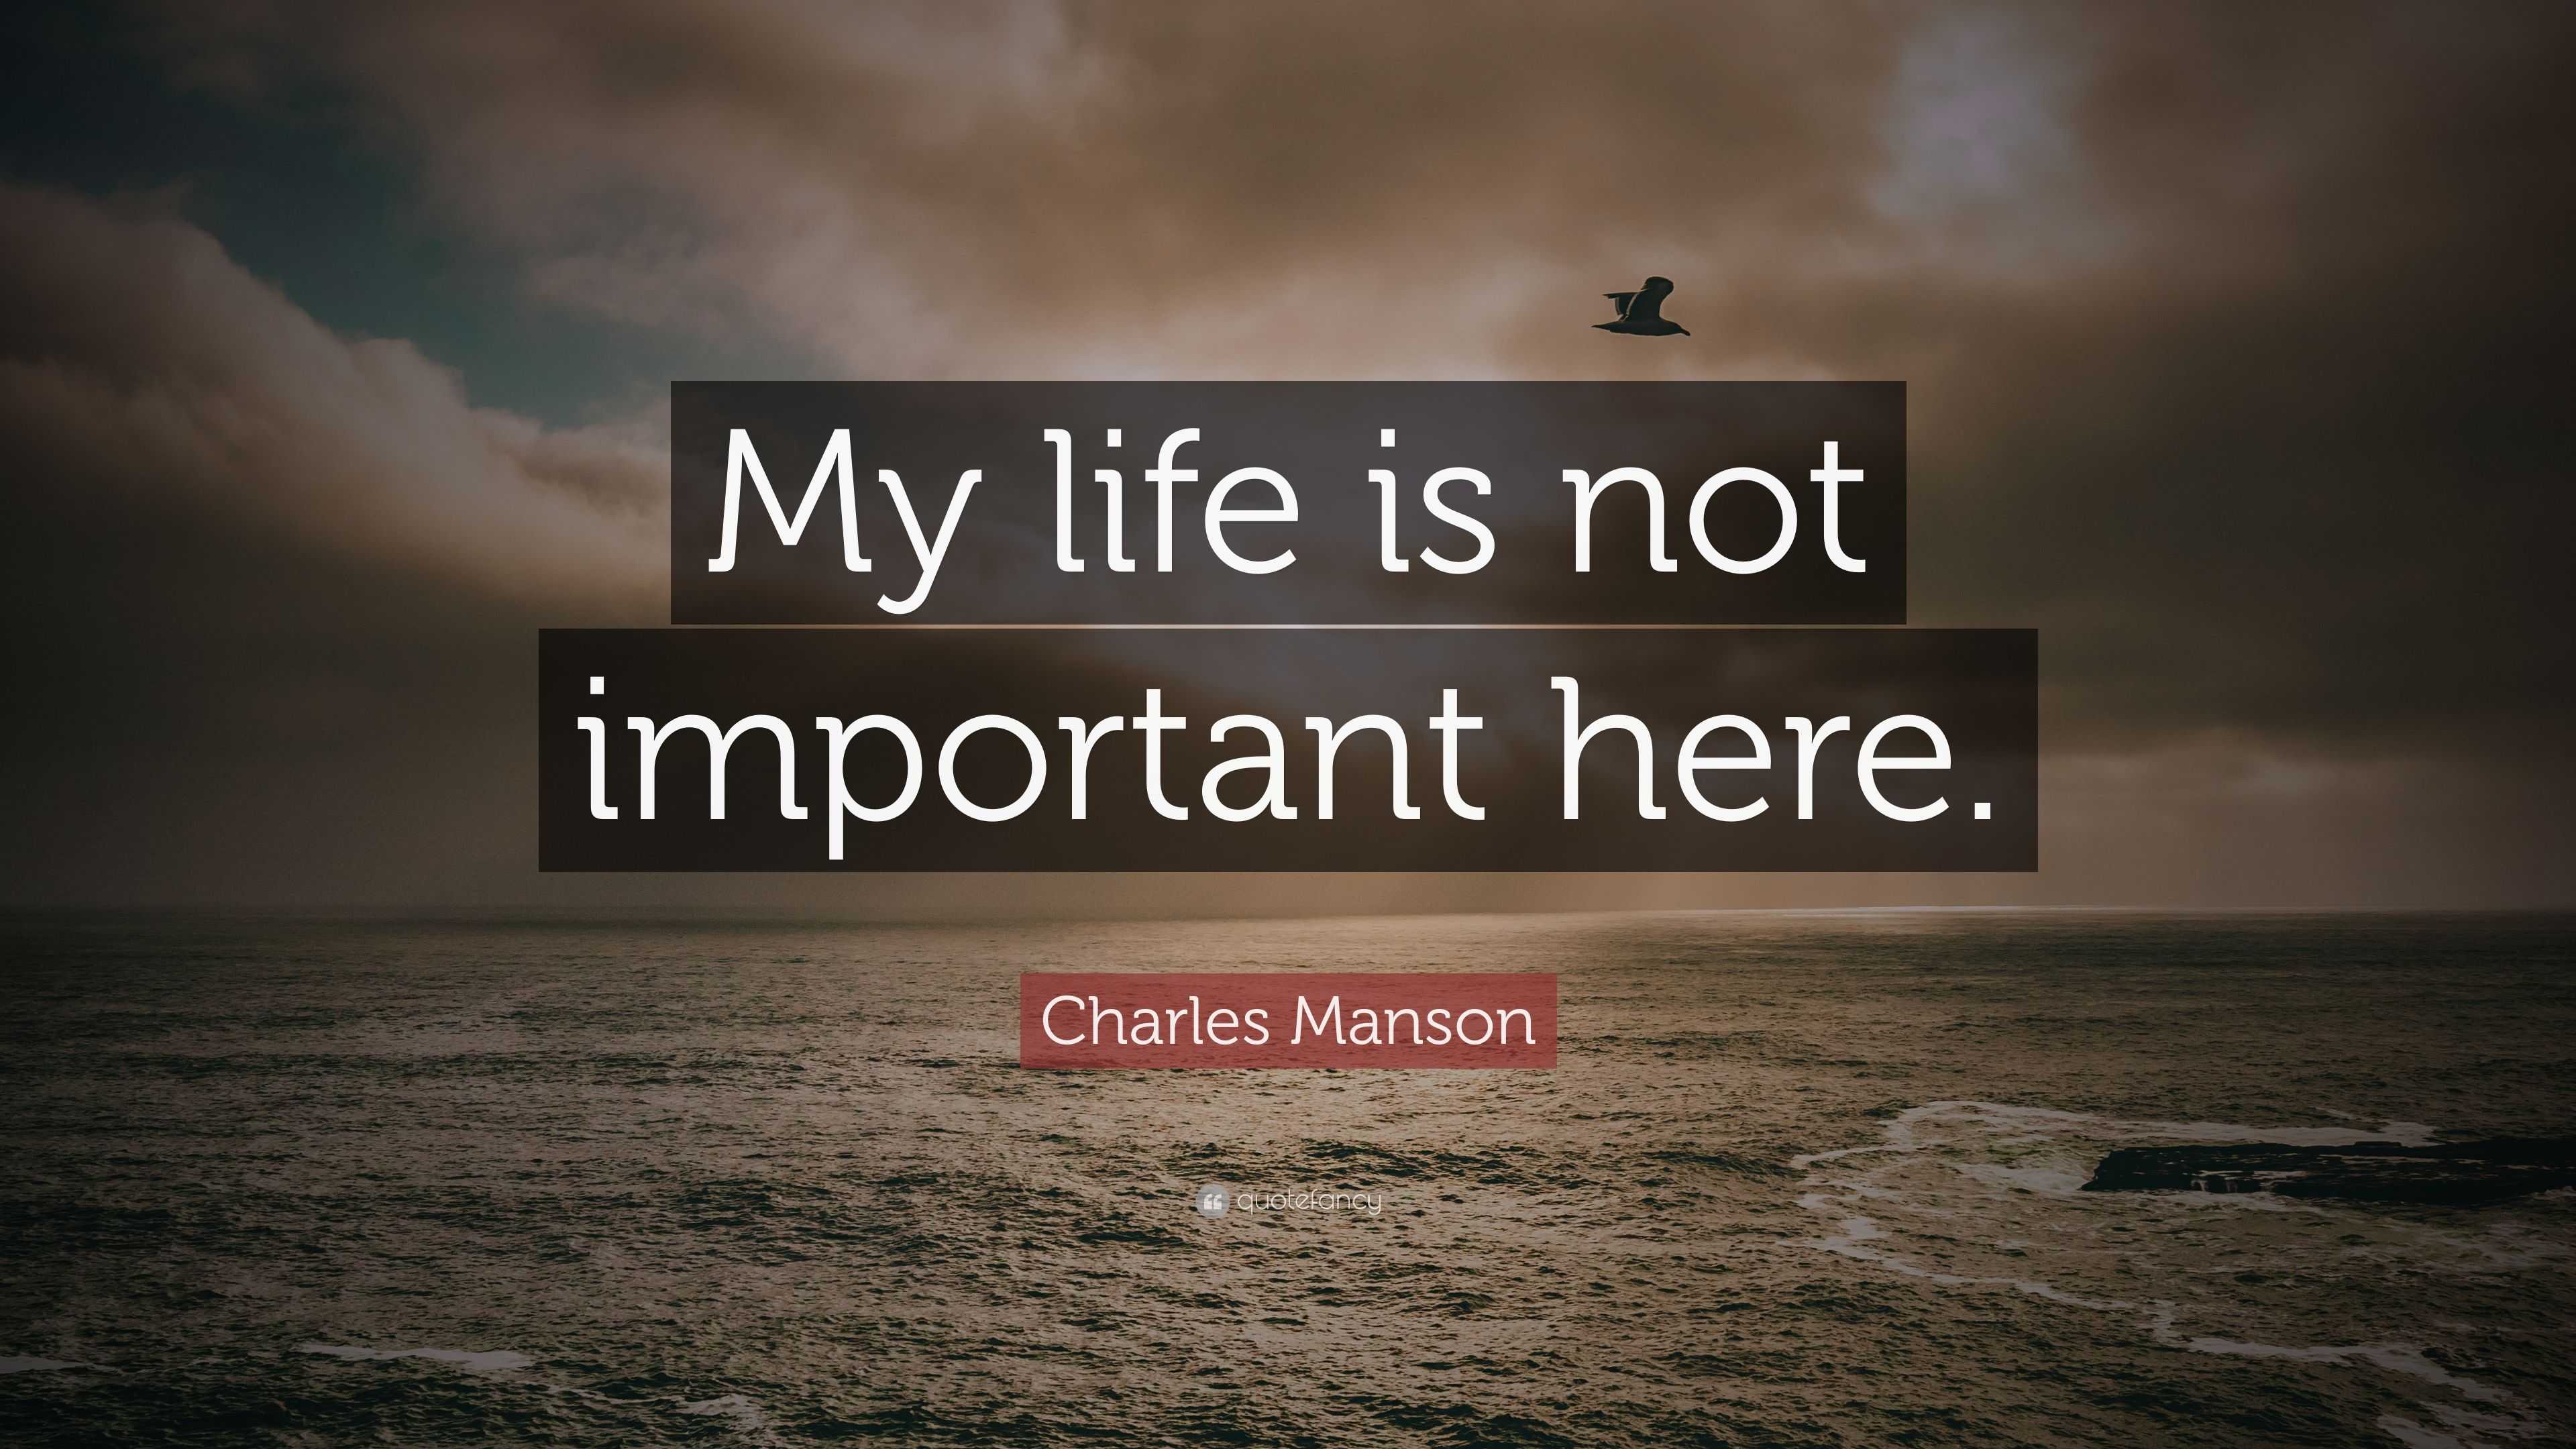 my life is quotes charles manson quote u201cmy life is not important here u201d 7